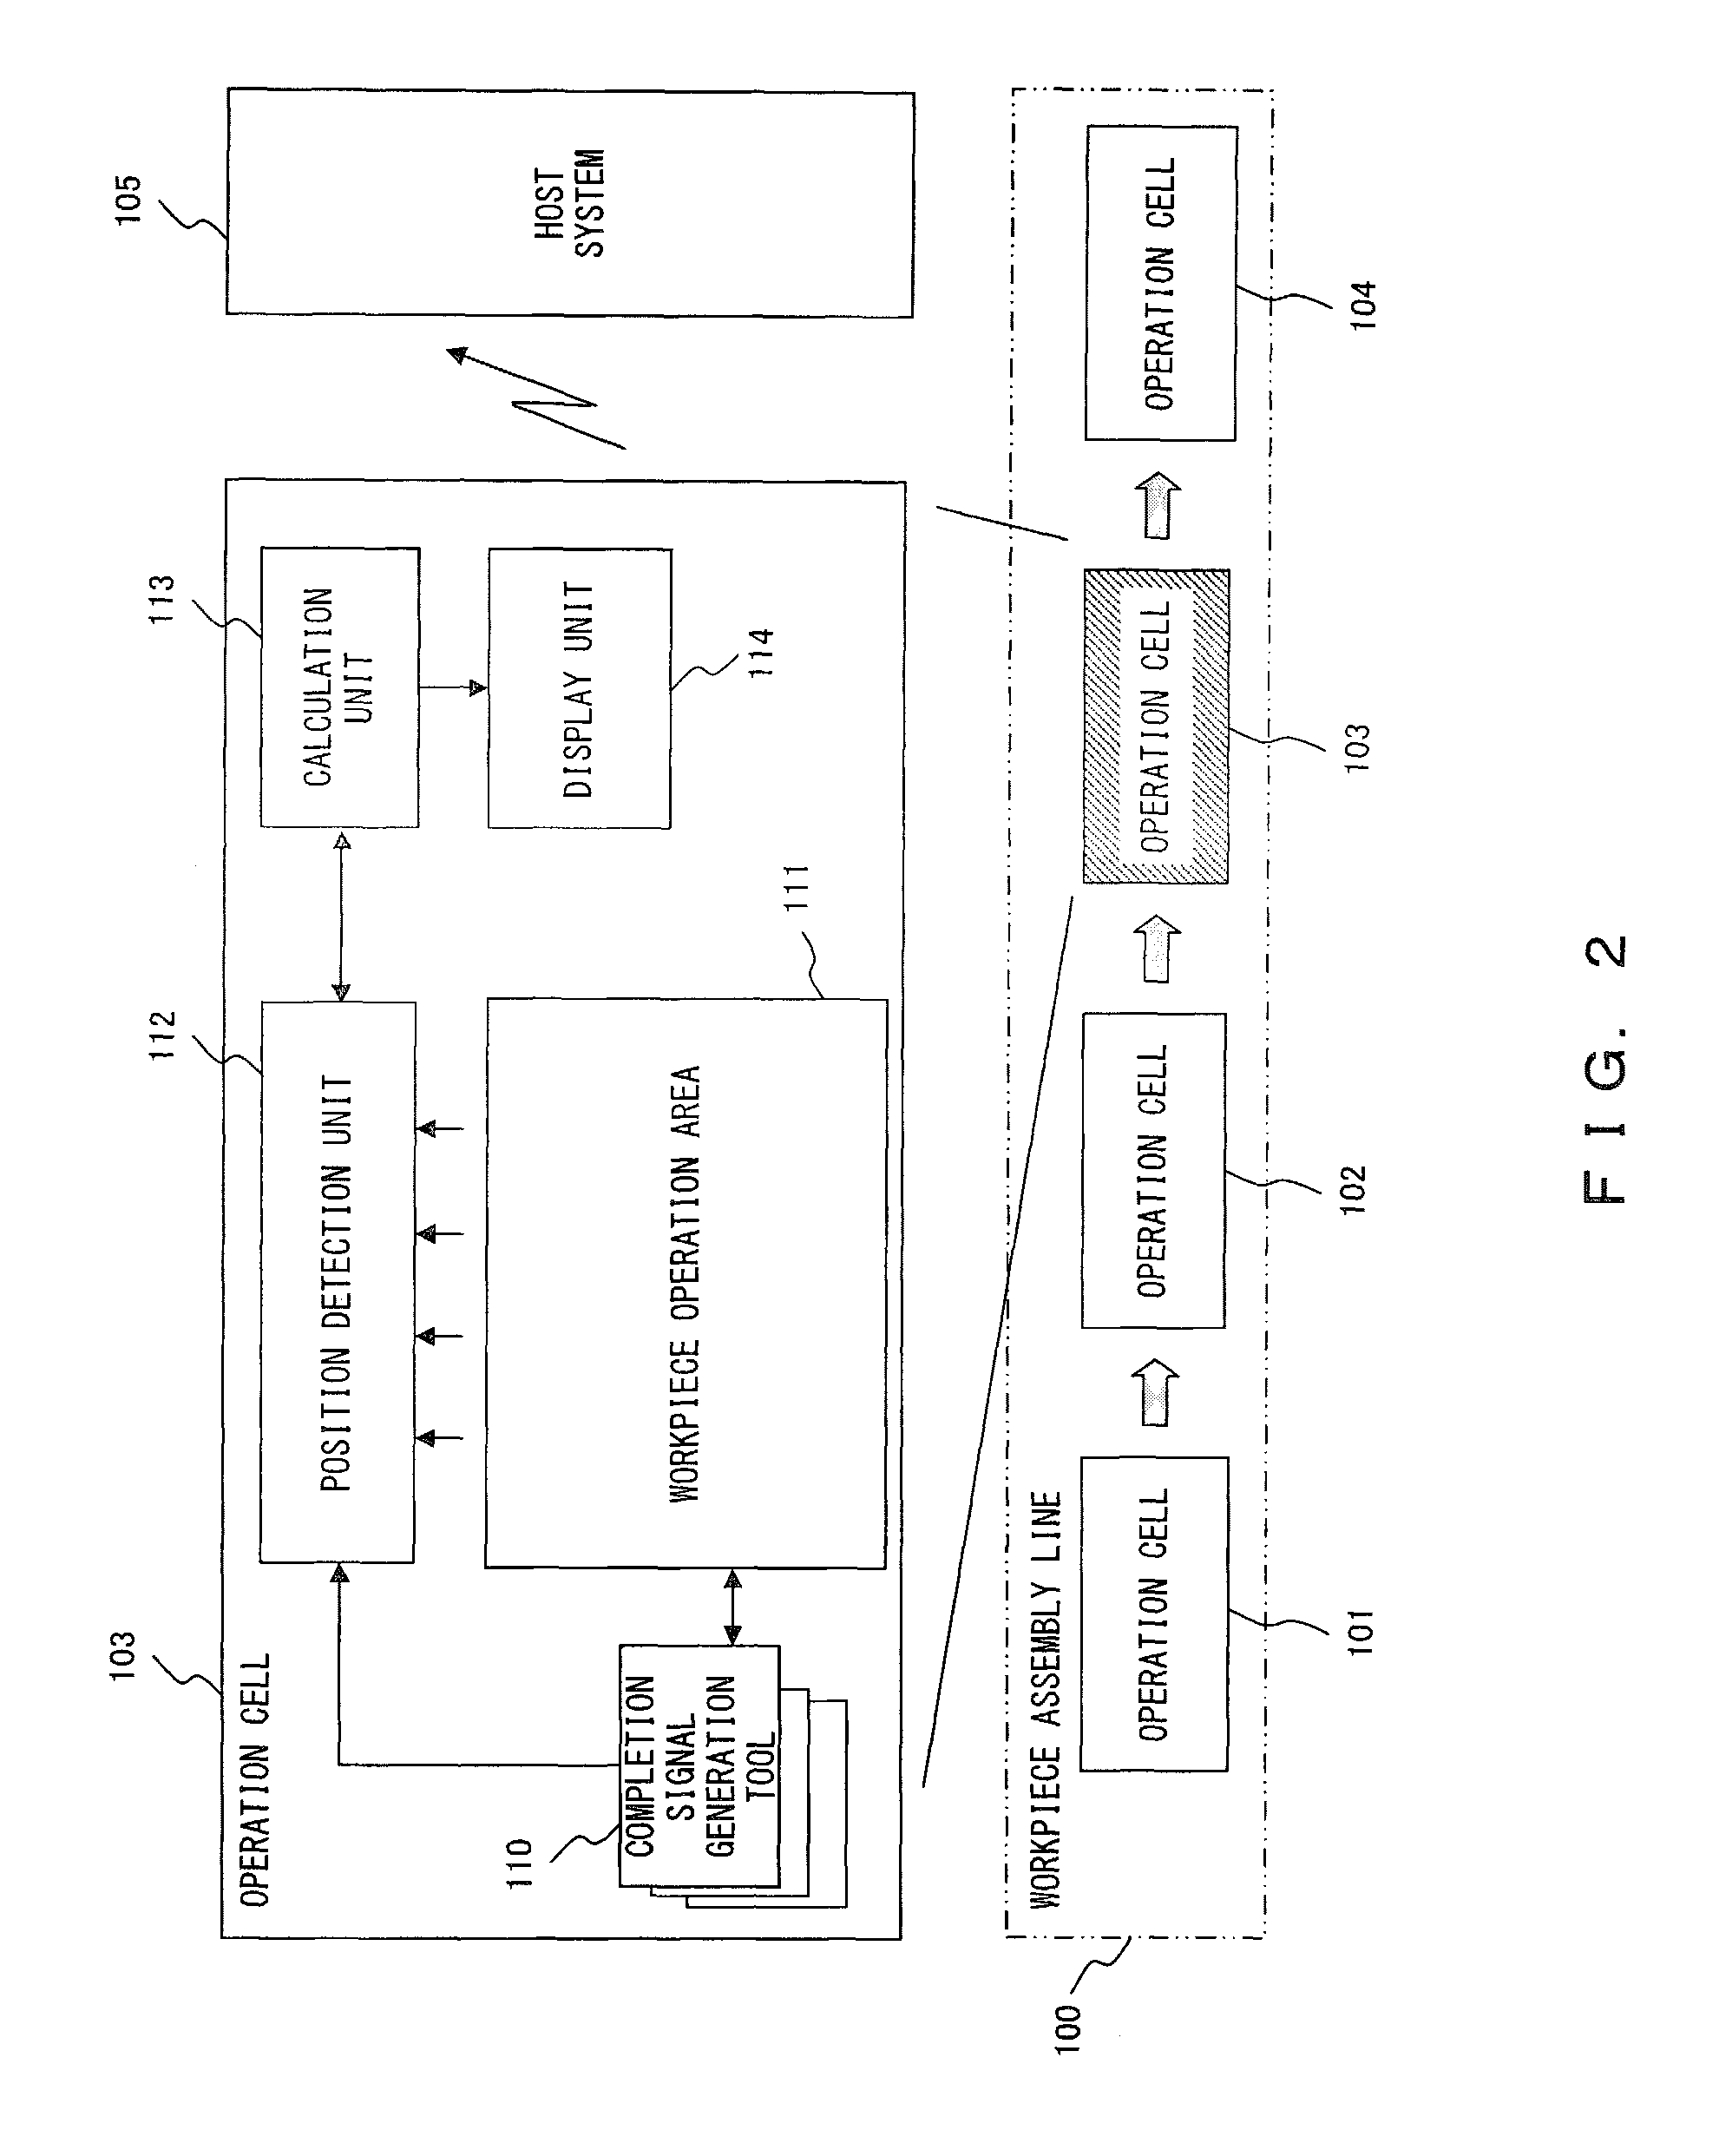 System, operation cell, method, product manufacturing method, and marker for locating operation position